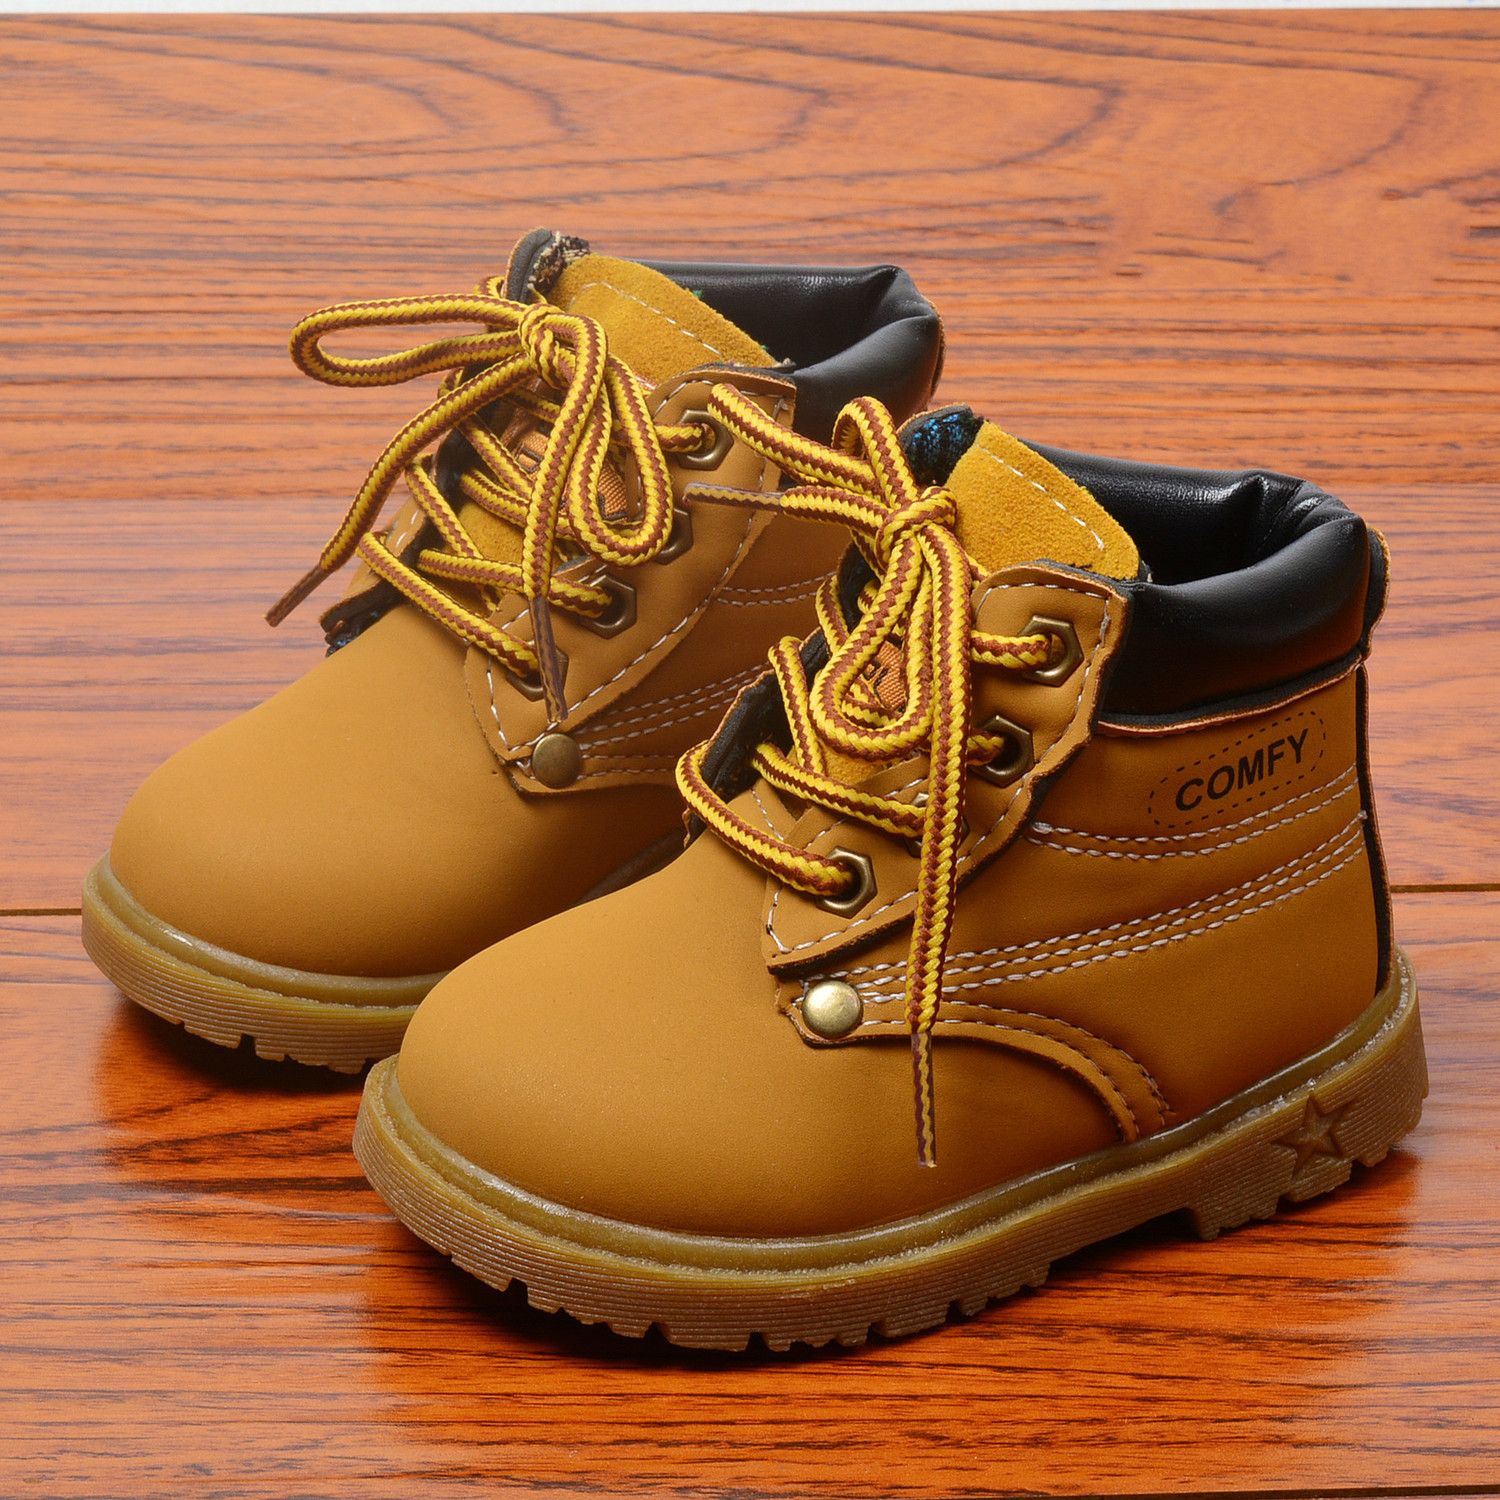 mustard color boots